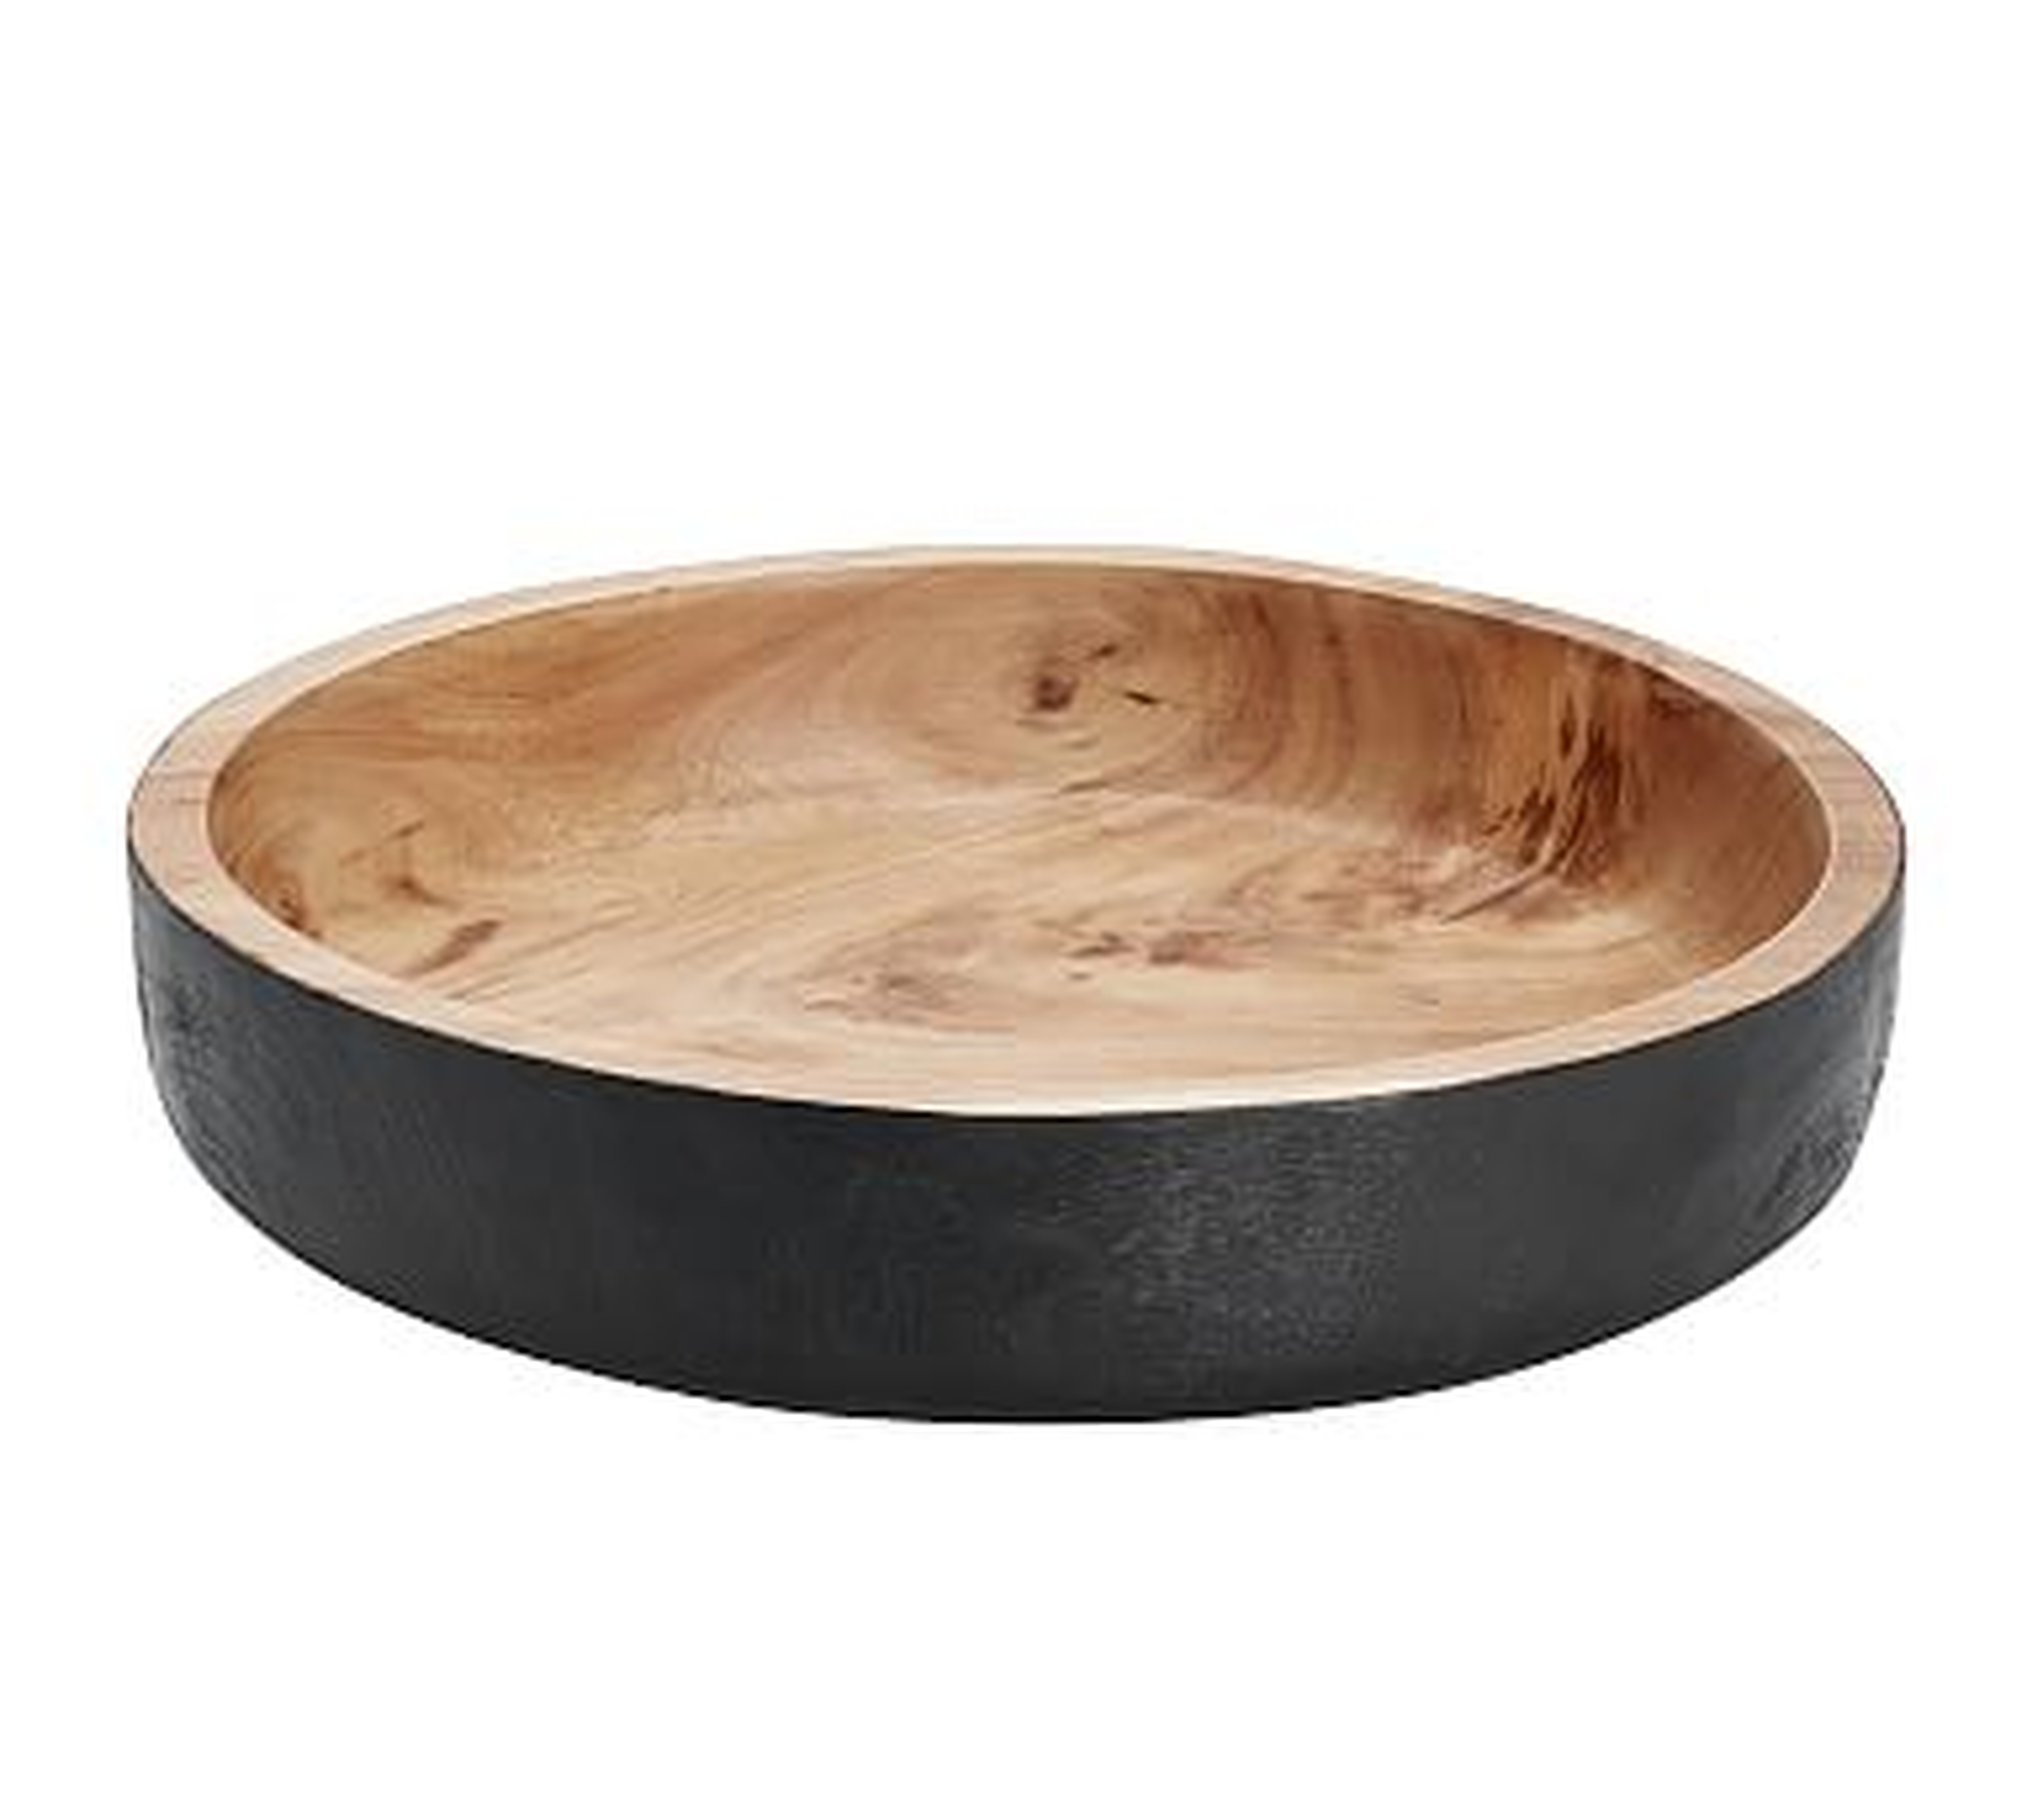 Burned Wooden Tray, Large - Pottery Barn